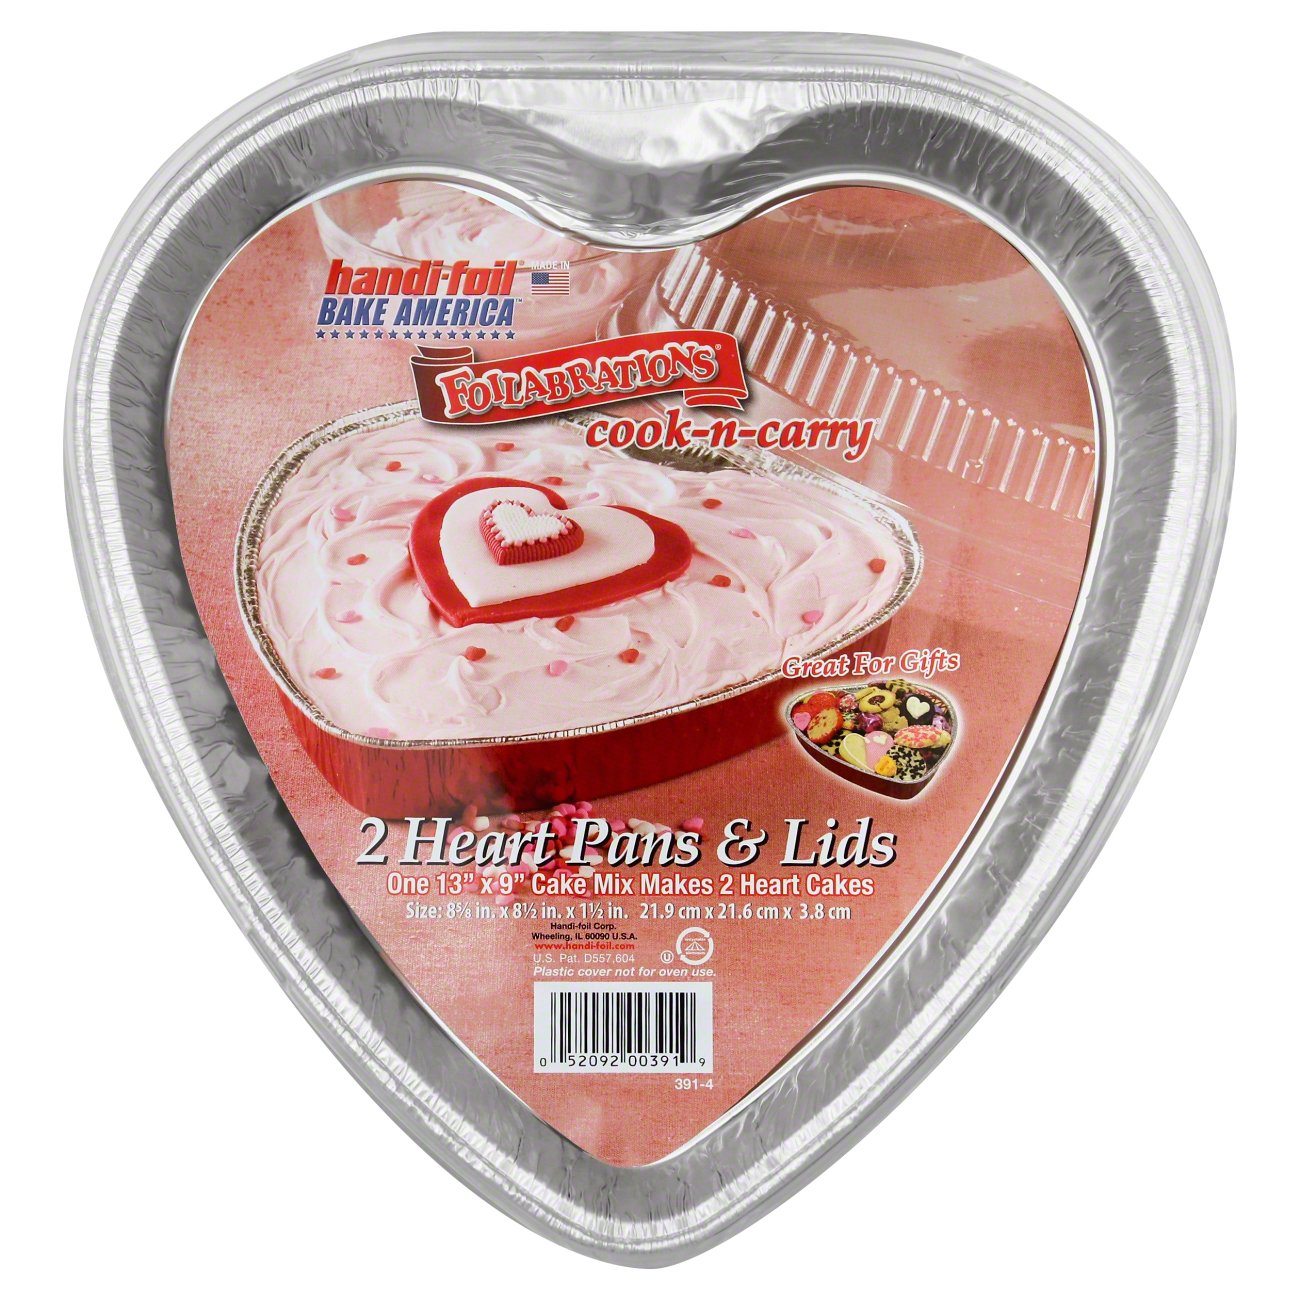 Mini Heart Shaped Foil Pan with Dome Lid